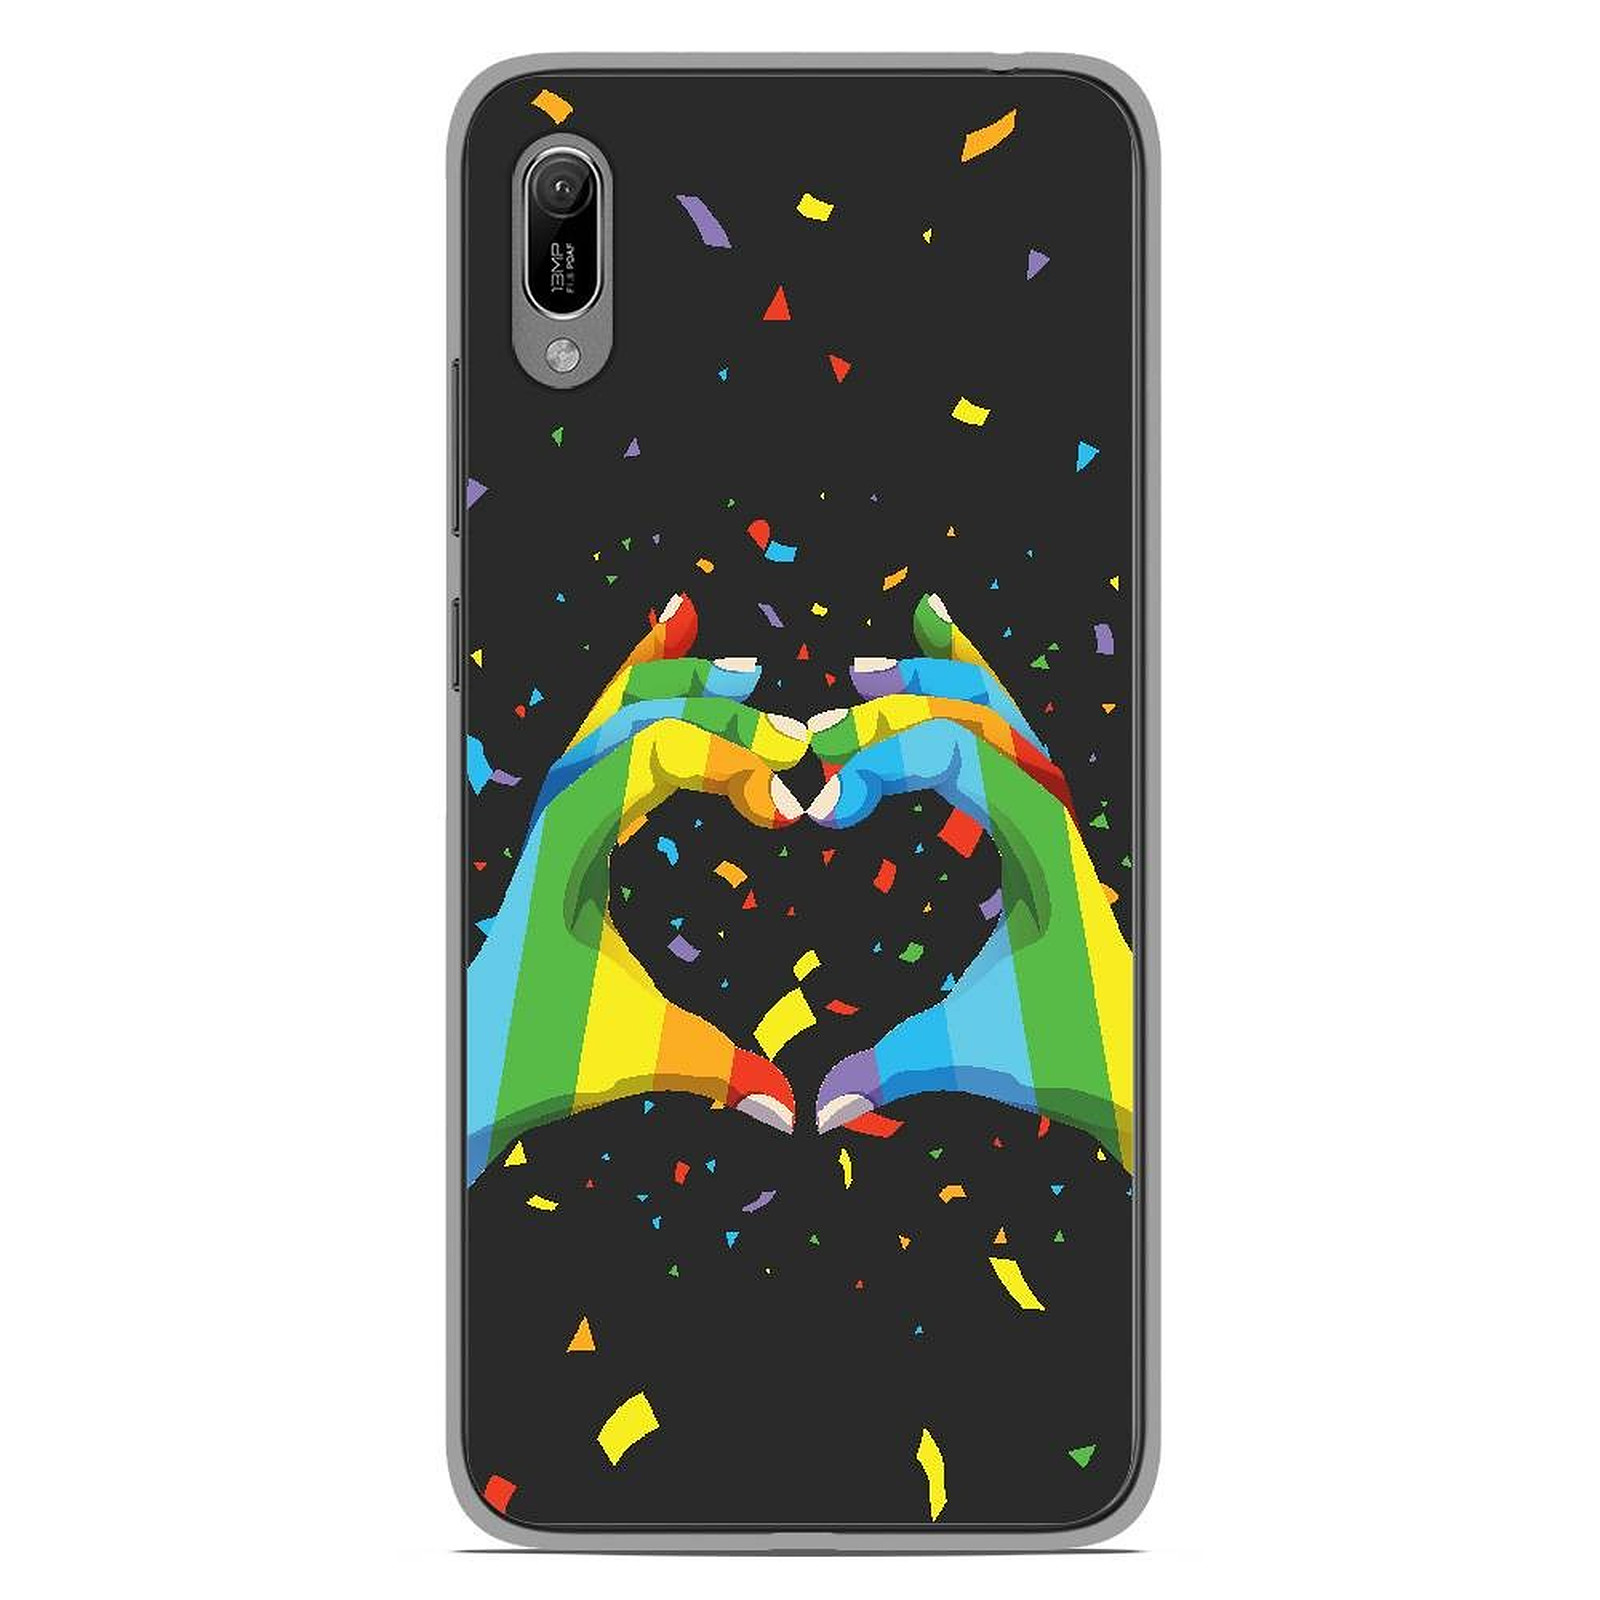 1001 Coques Coque silicone gel Huawei Y6 2019 motif LGBT - Coque telephone 1001Coques